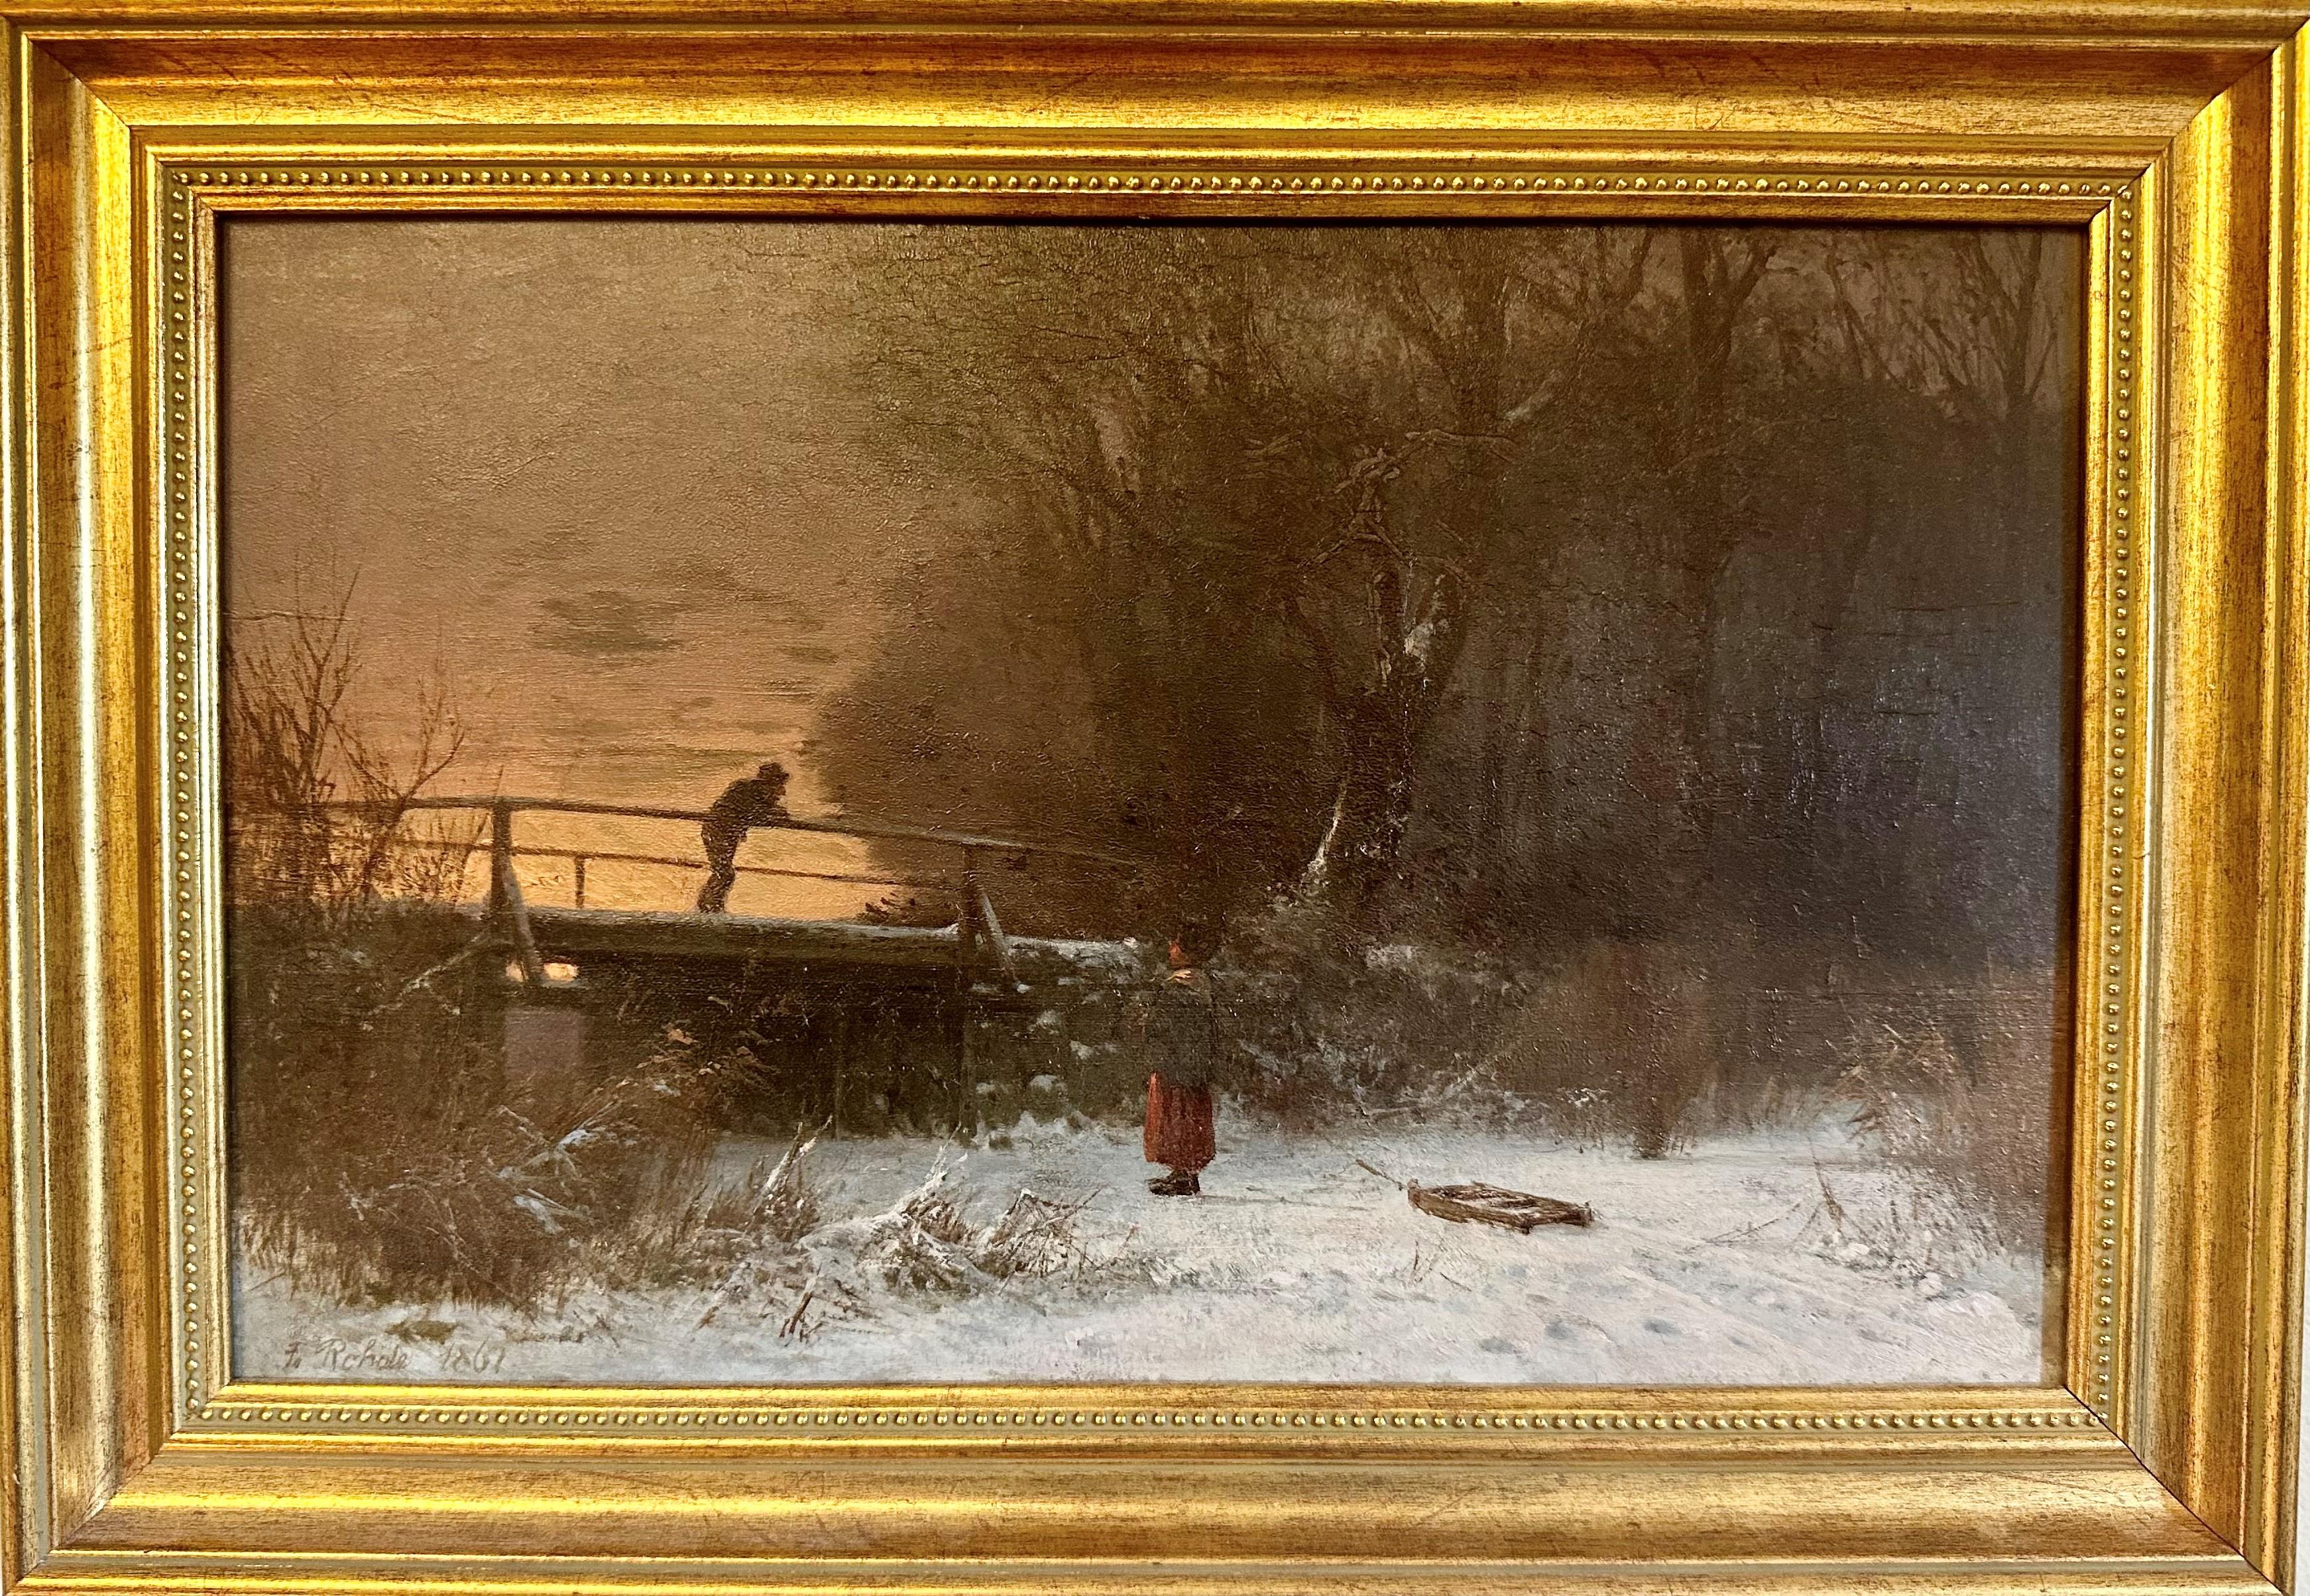 Frederik Rohde Landscape Painting - Girl with sledge by the bridge